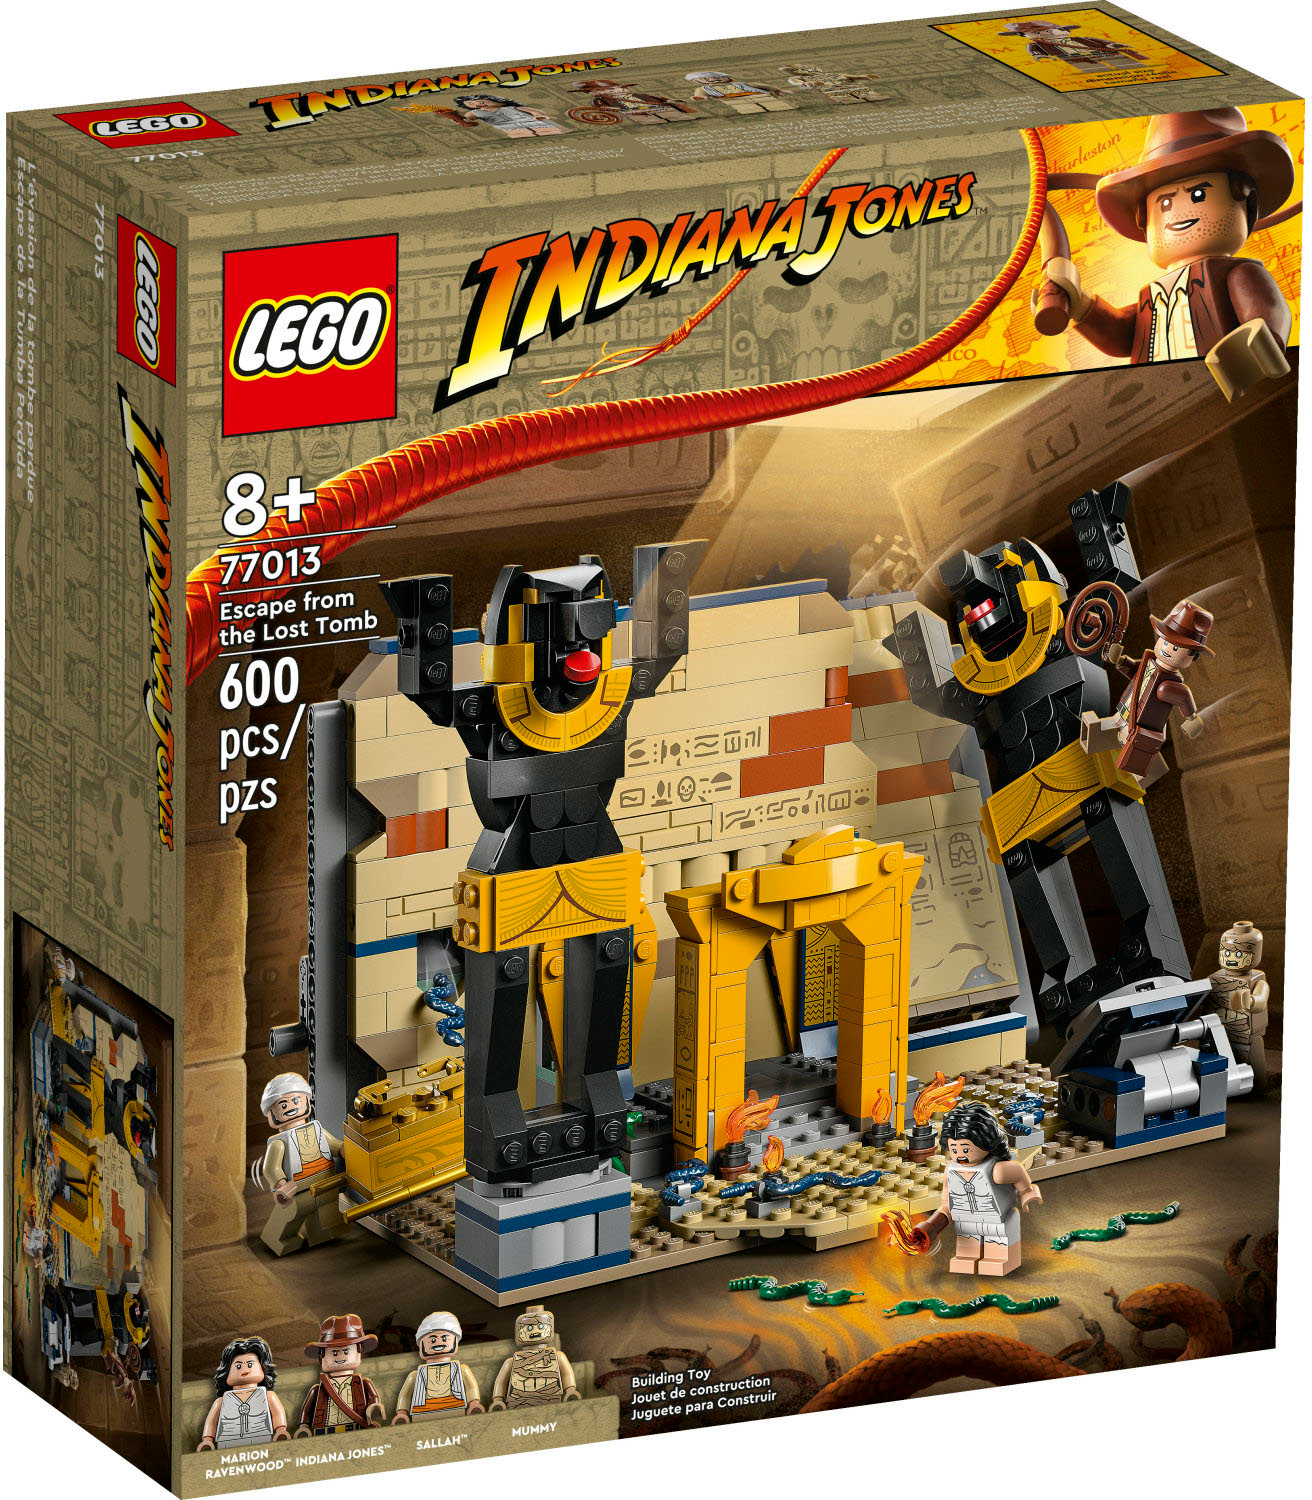 lego-indiana-jones-escape-from-the-lost-tomb-77013-6385845-best-buy